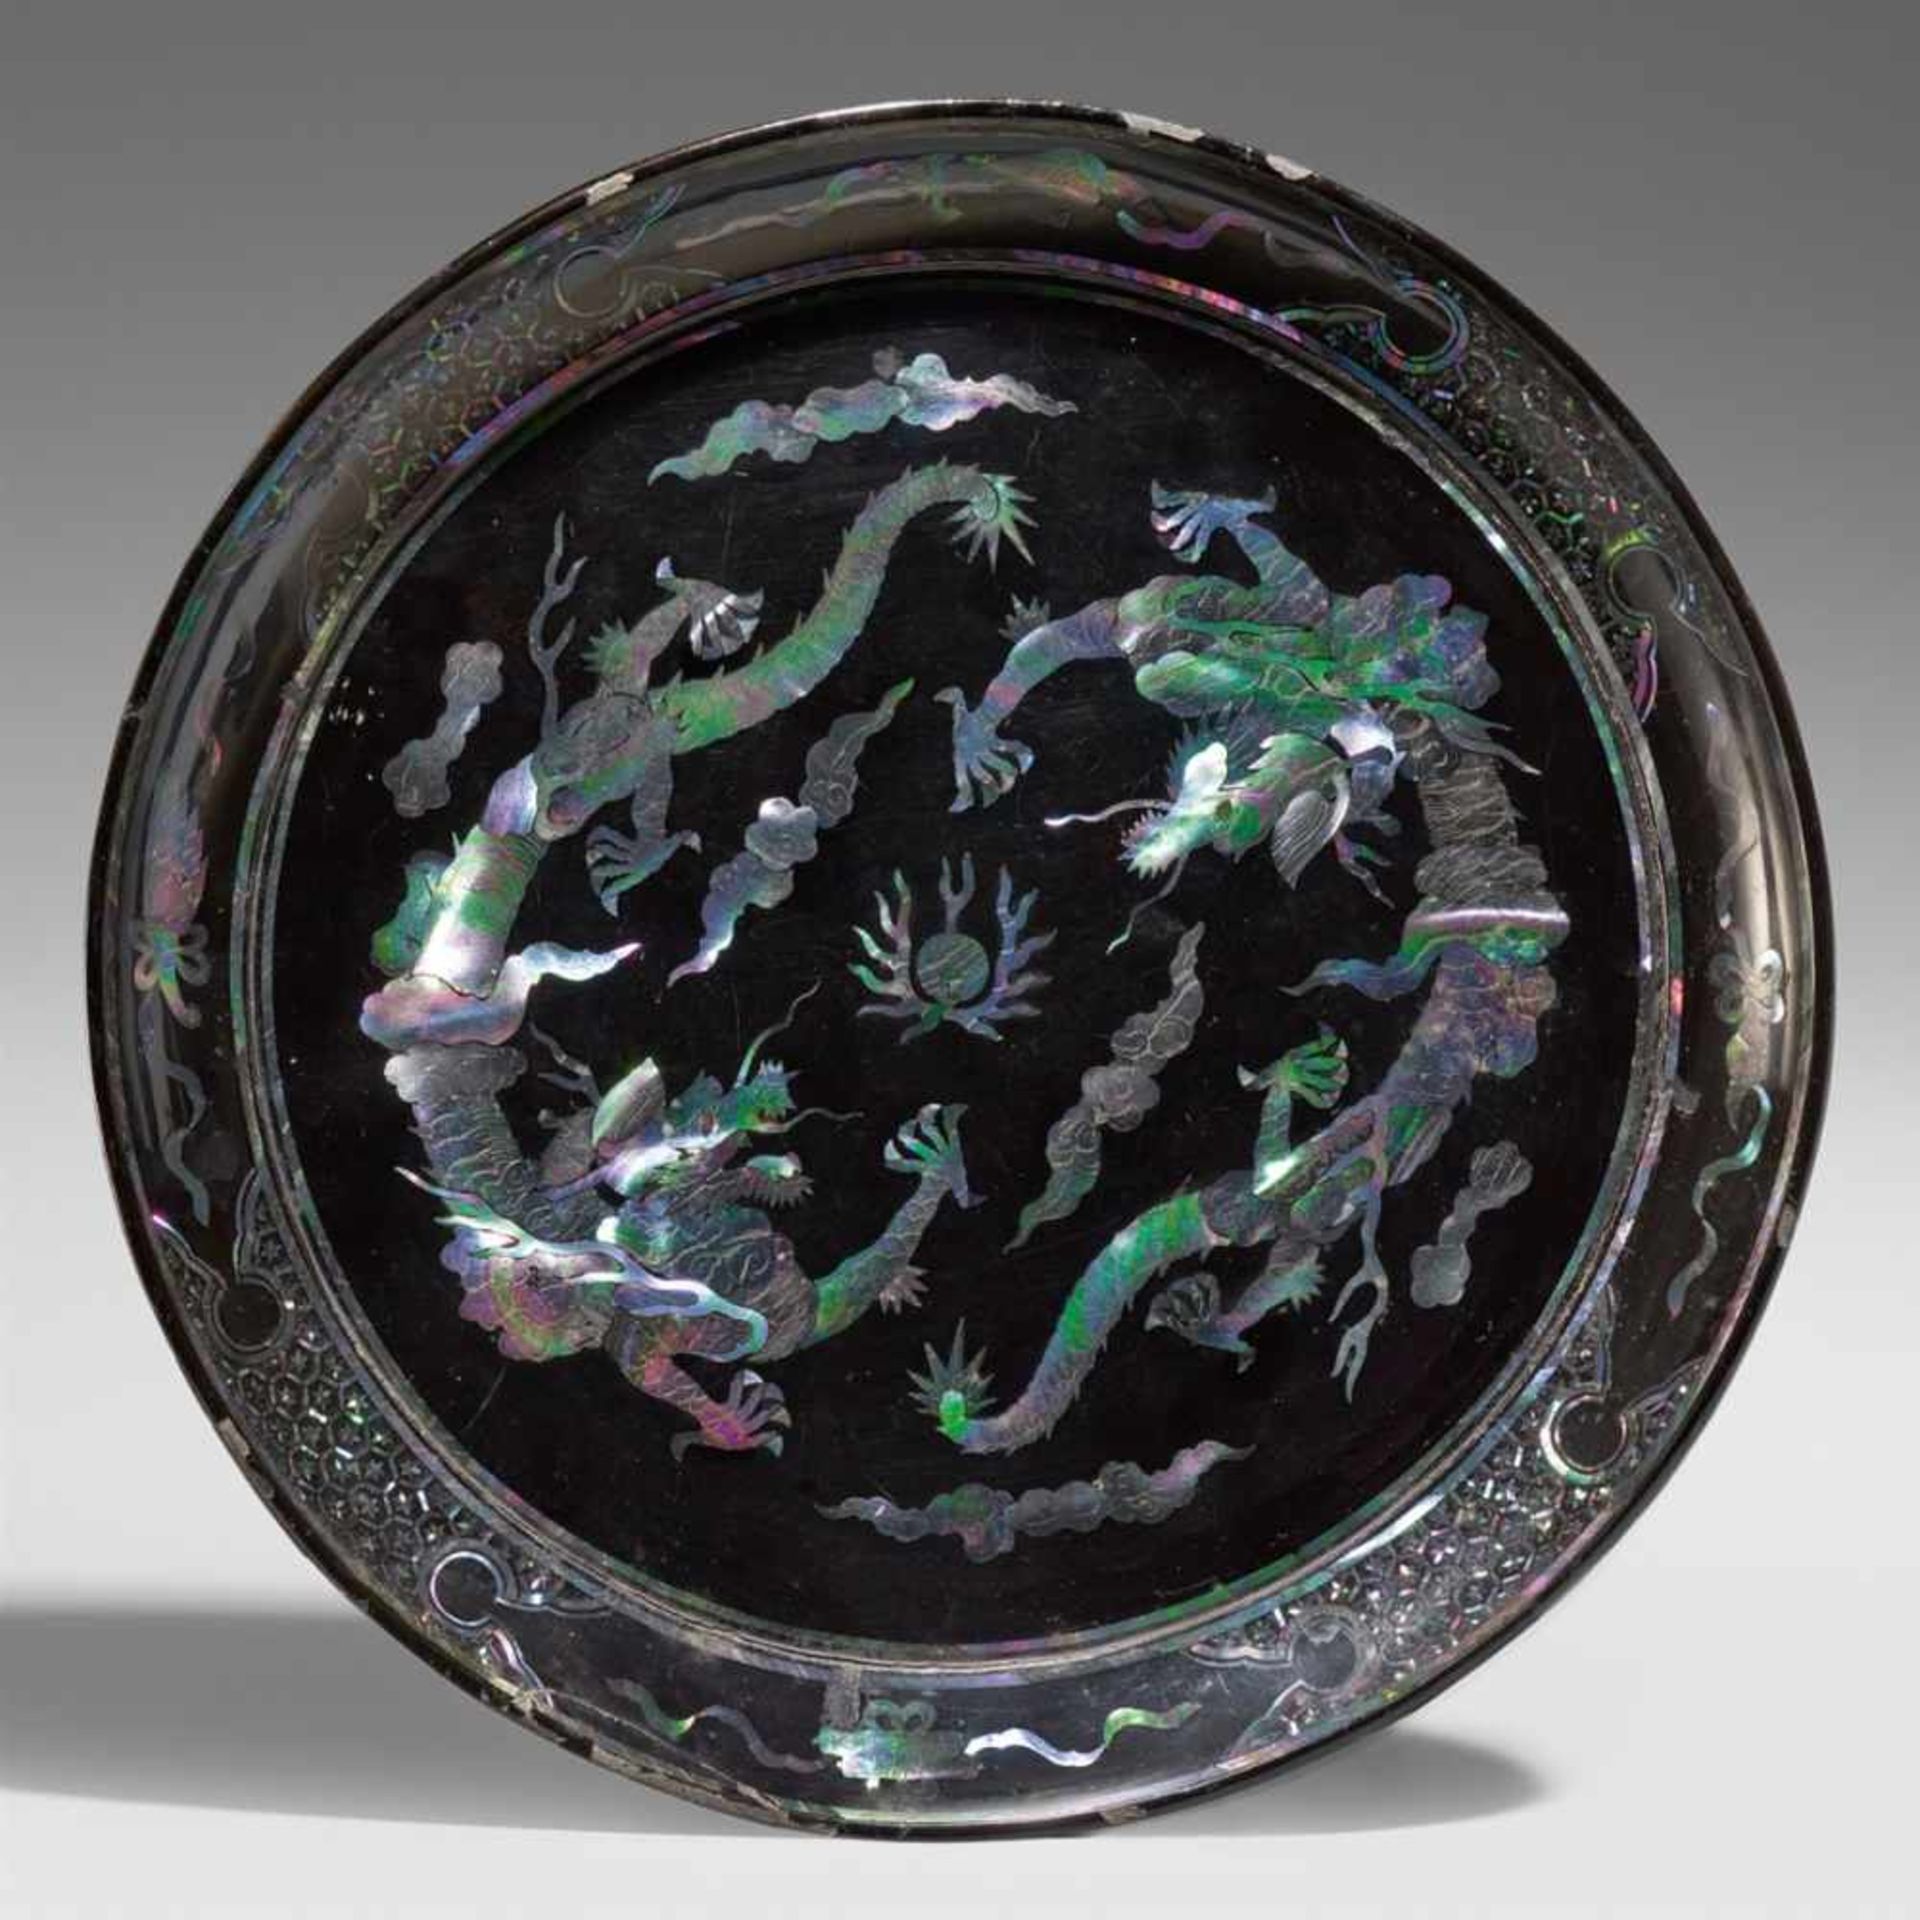 A black lacquer dish with mother-of-pearl inlays. Ryûkyû. 17th/18th century<b